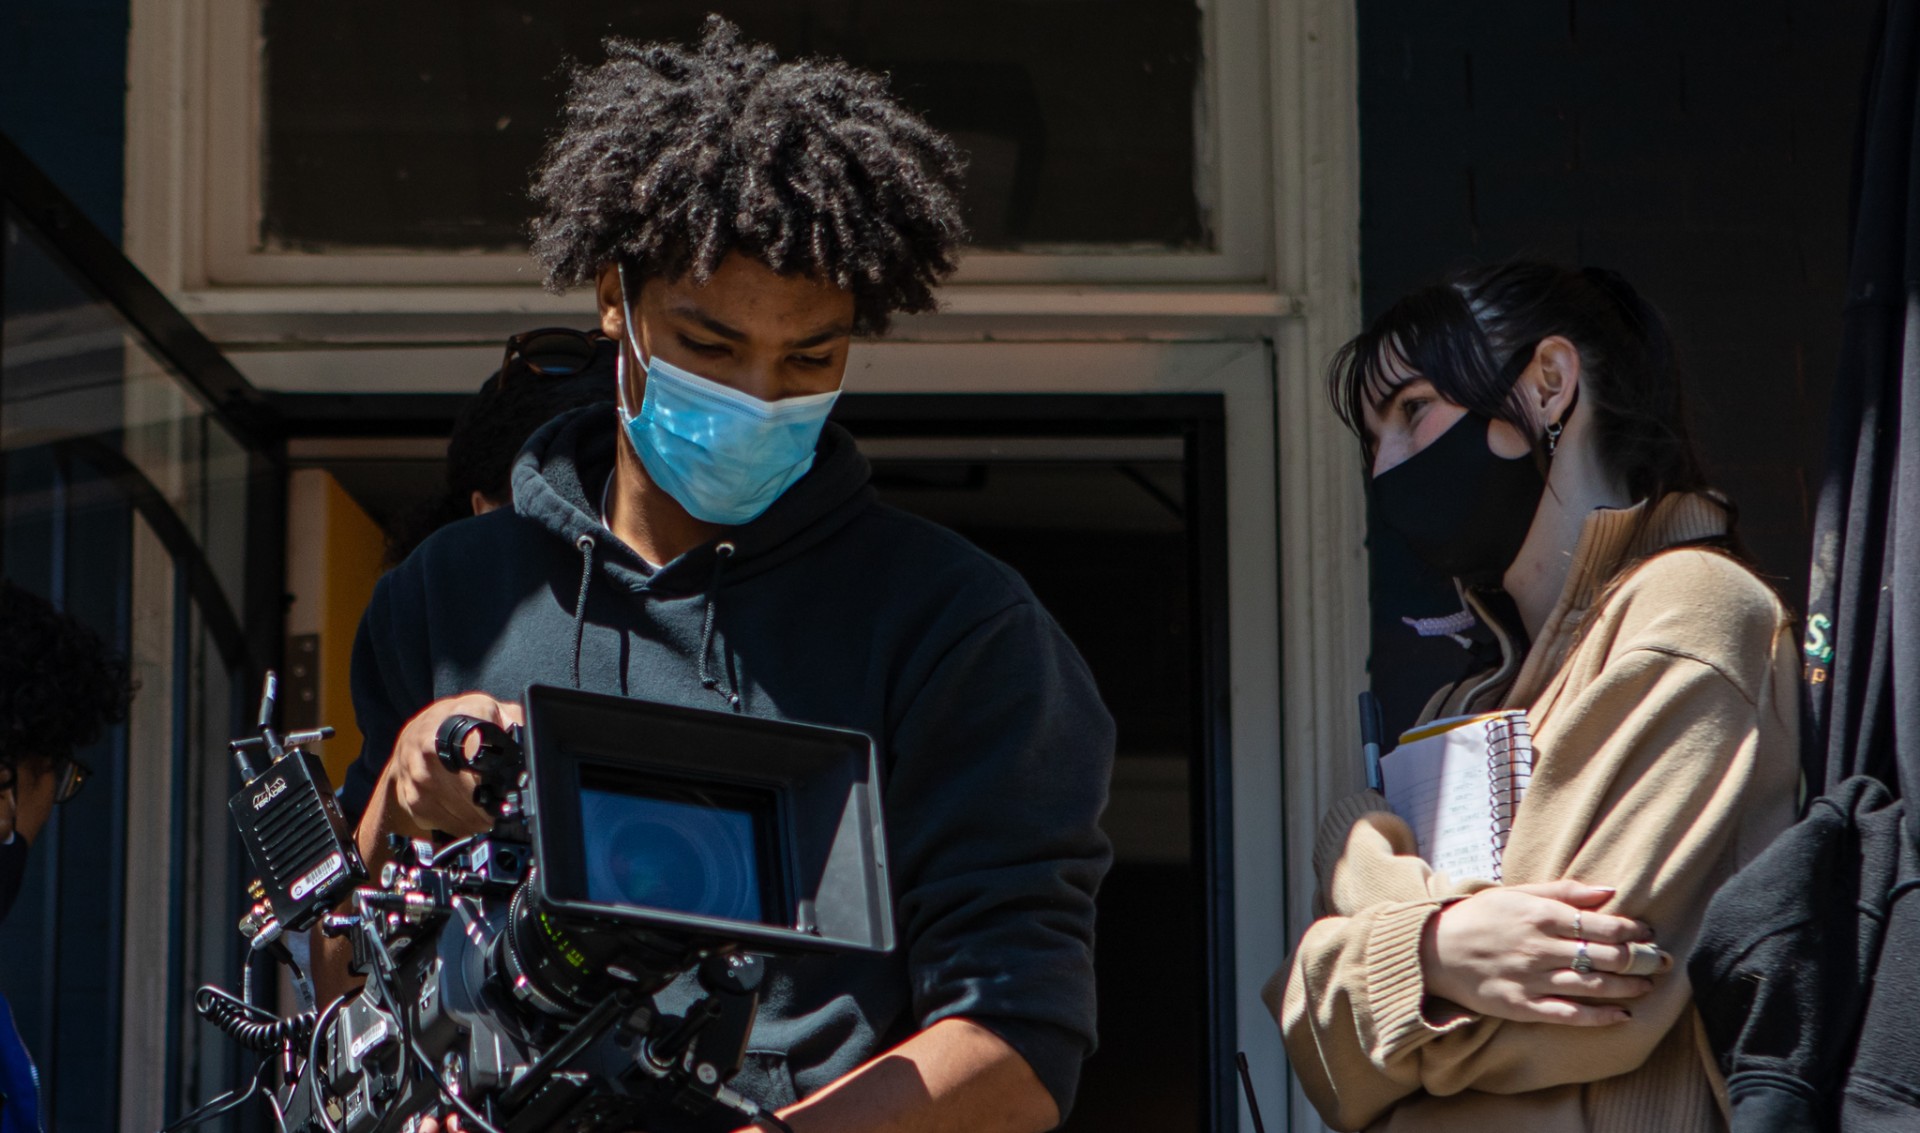 A Black person is on a film set holding a camera.